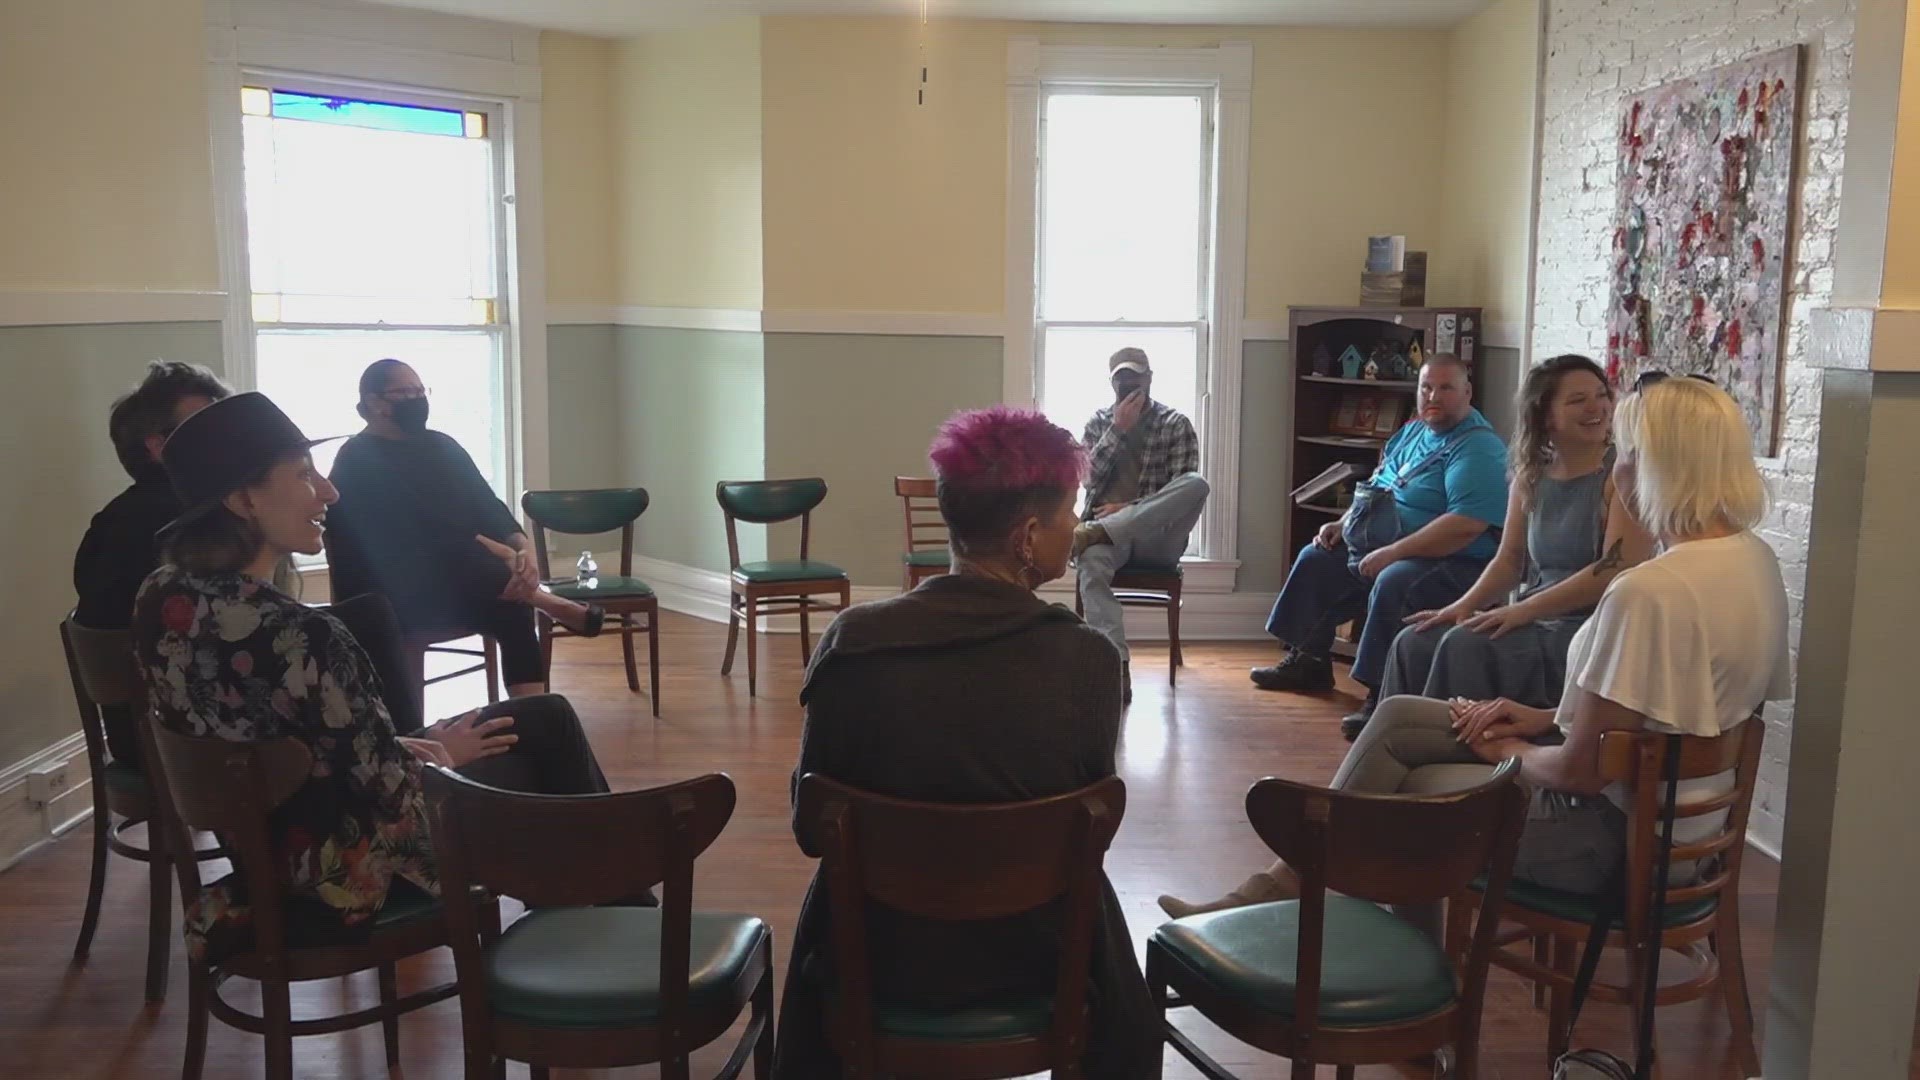 The group, Sober in Knoxville, held a book reading, discussion and even yoga on Saturday.